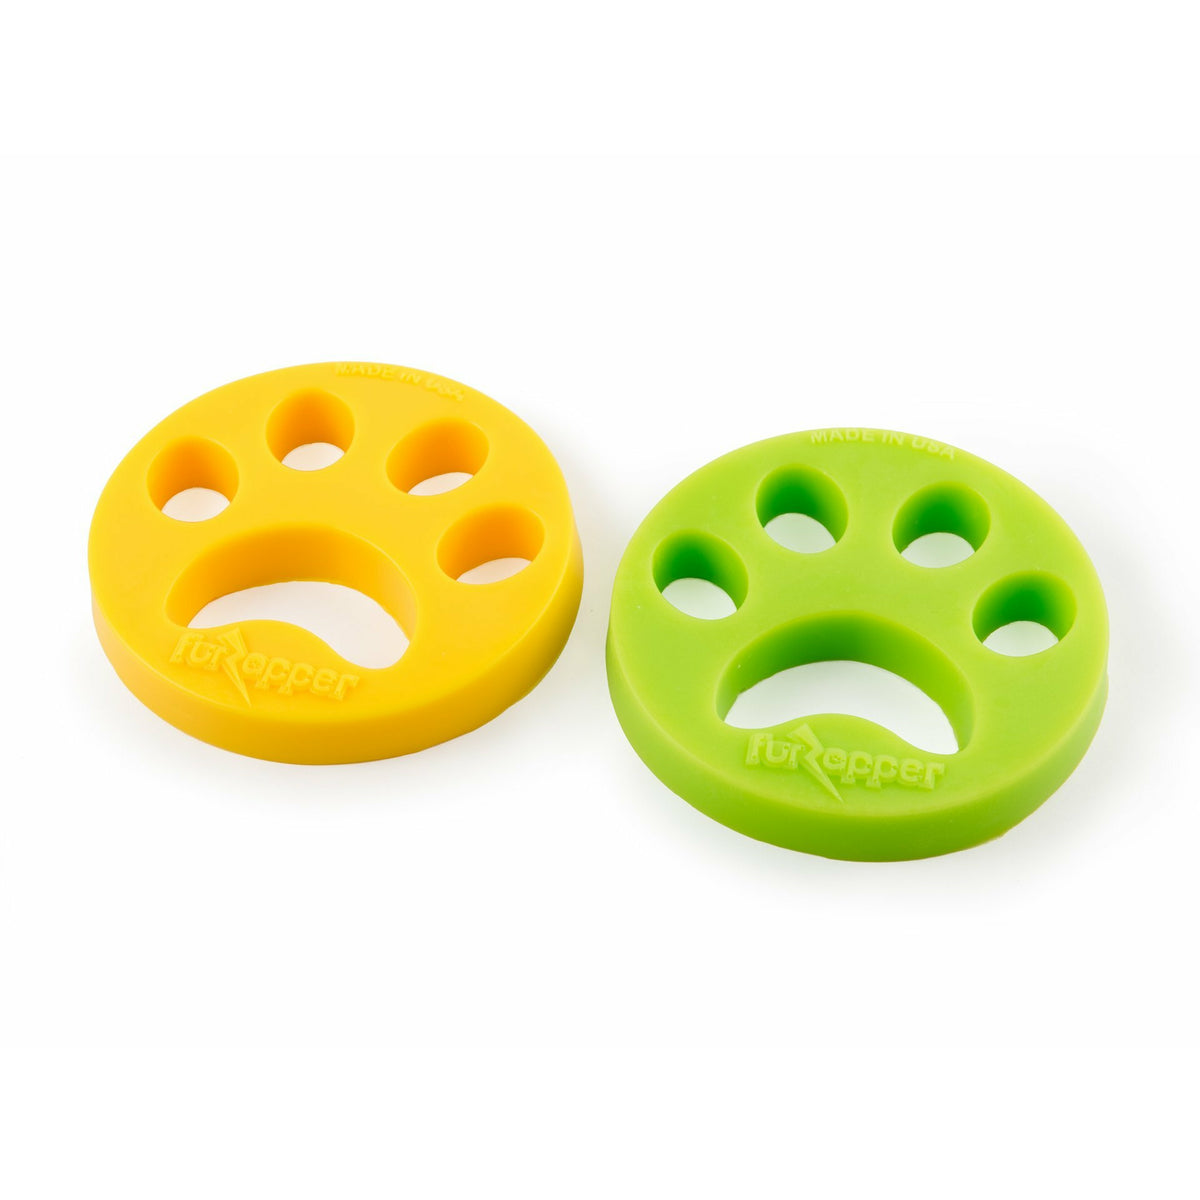 FurZapper - Pet Hair and Fur Remover for Laundry (2pk)